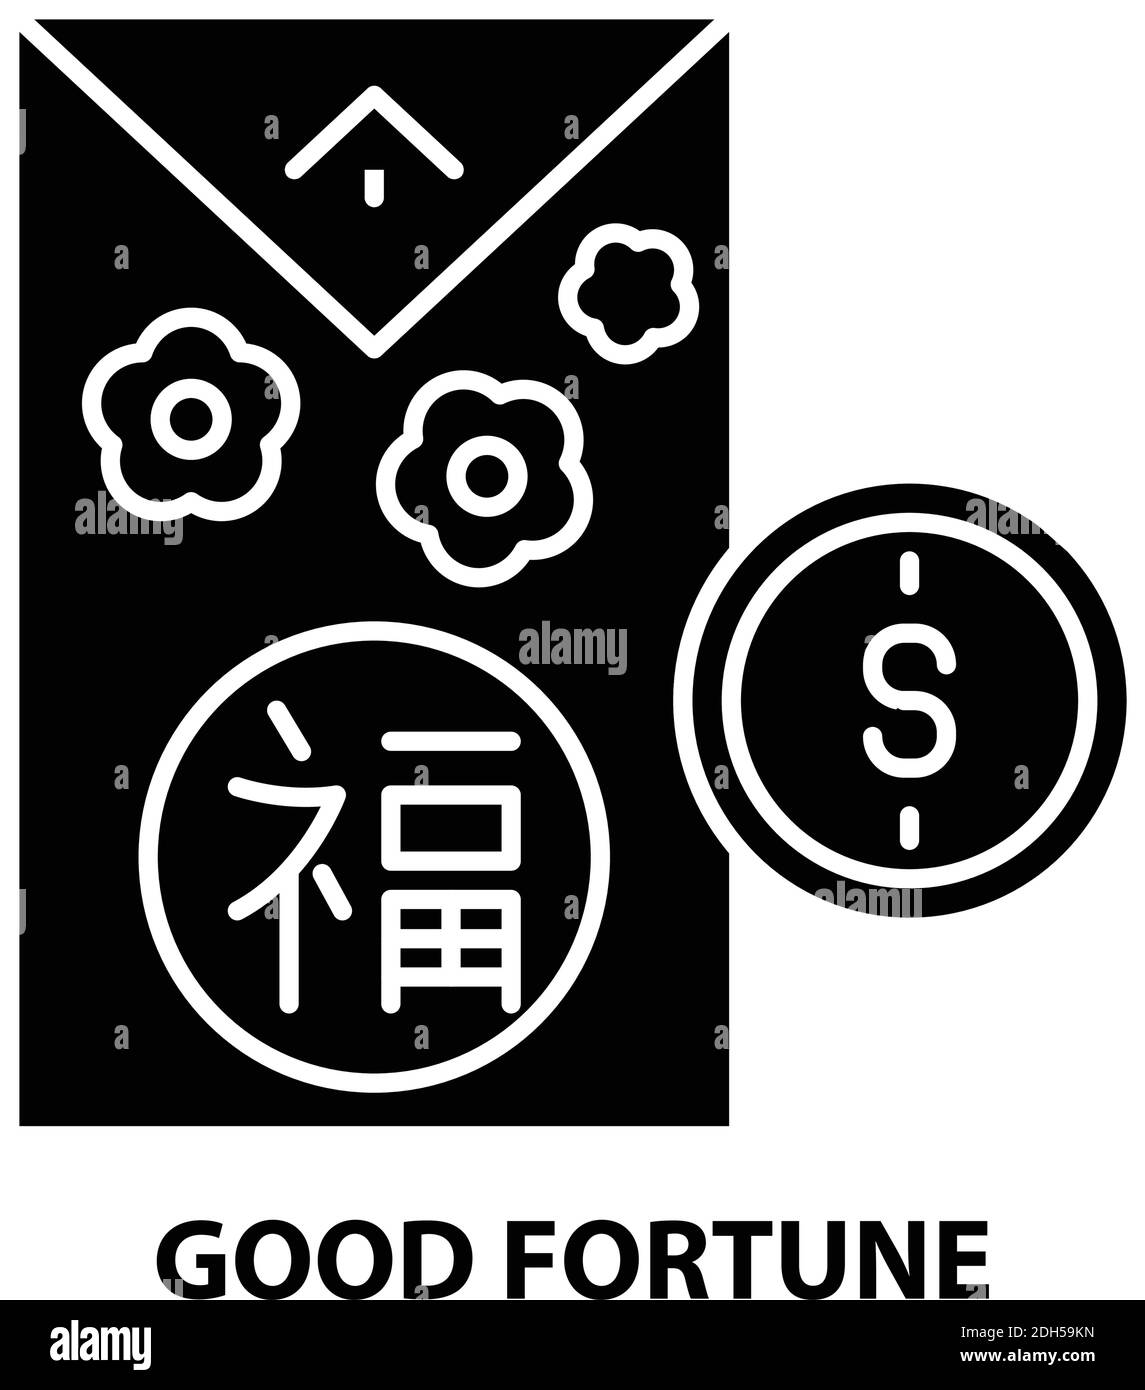 good fortune icon, black vector sign with editable strokes, concept illustration Stock Vector